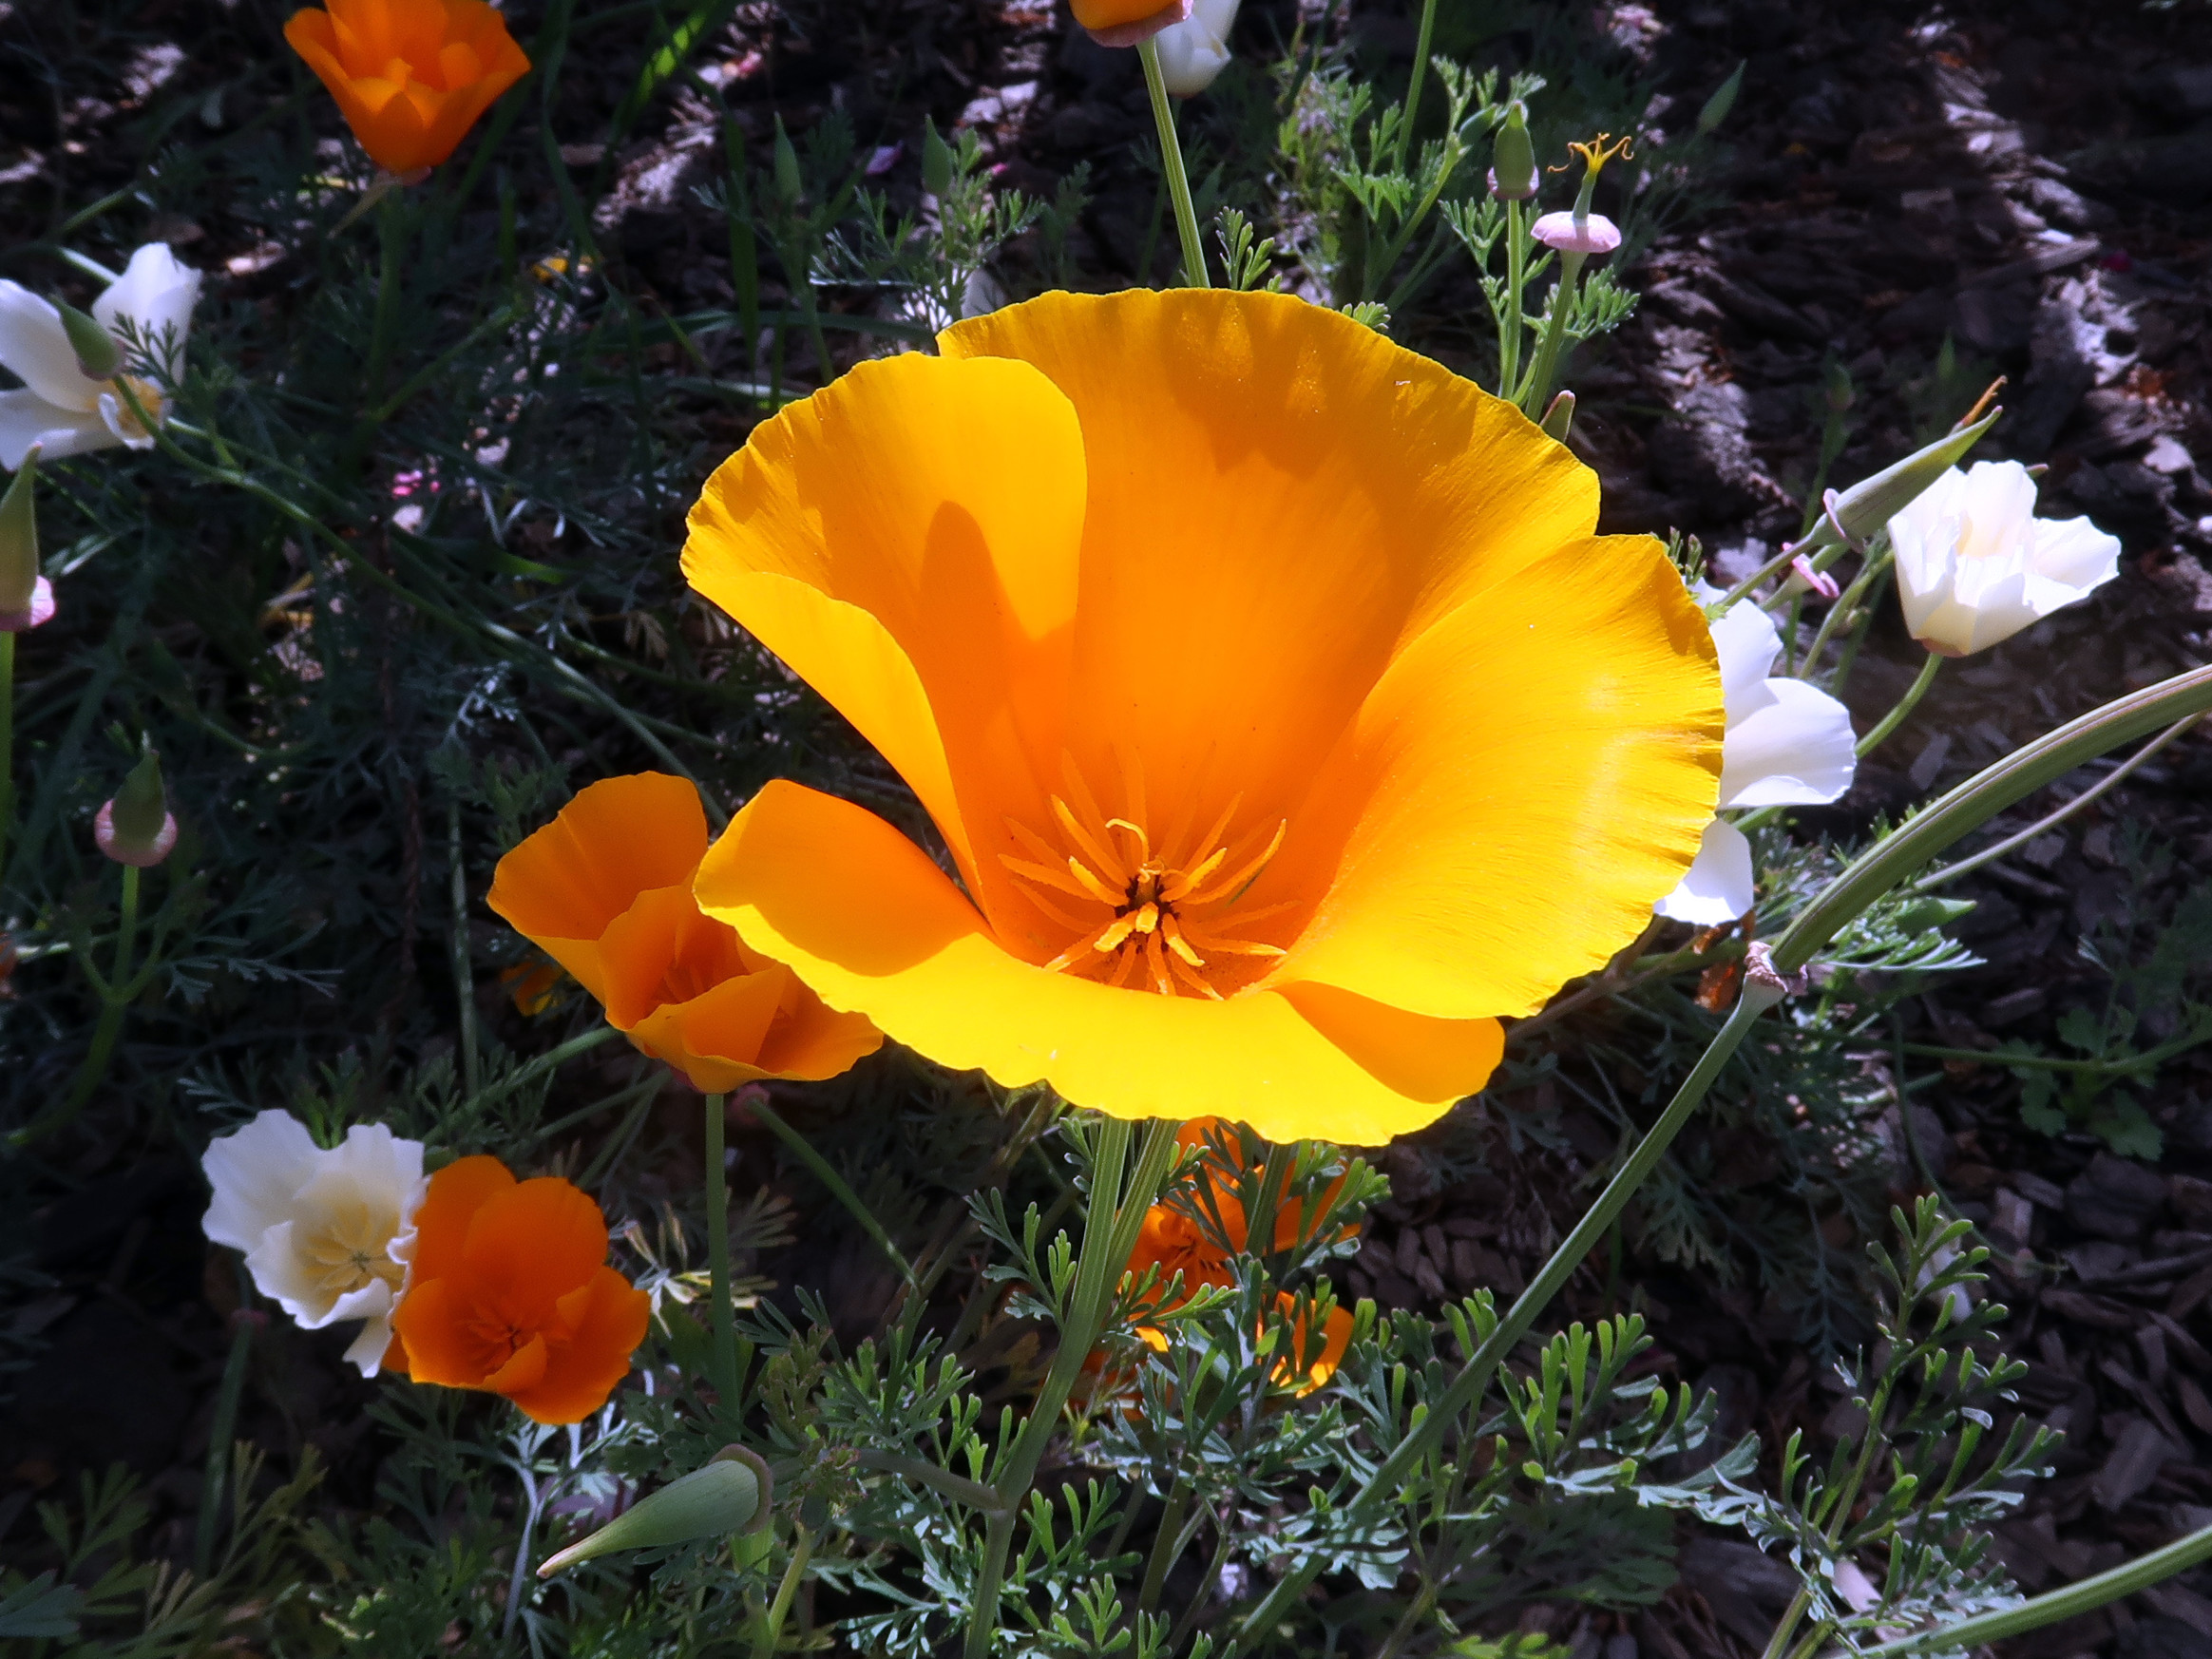 California Poppies in Willits, California - note the white flowers; they are a natural variation